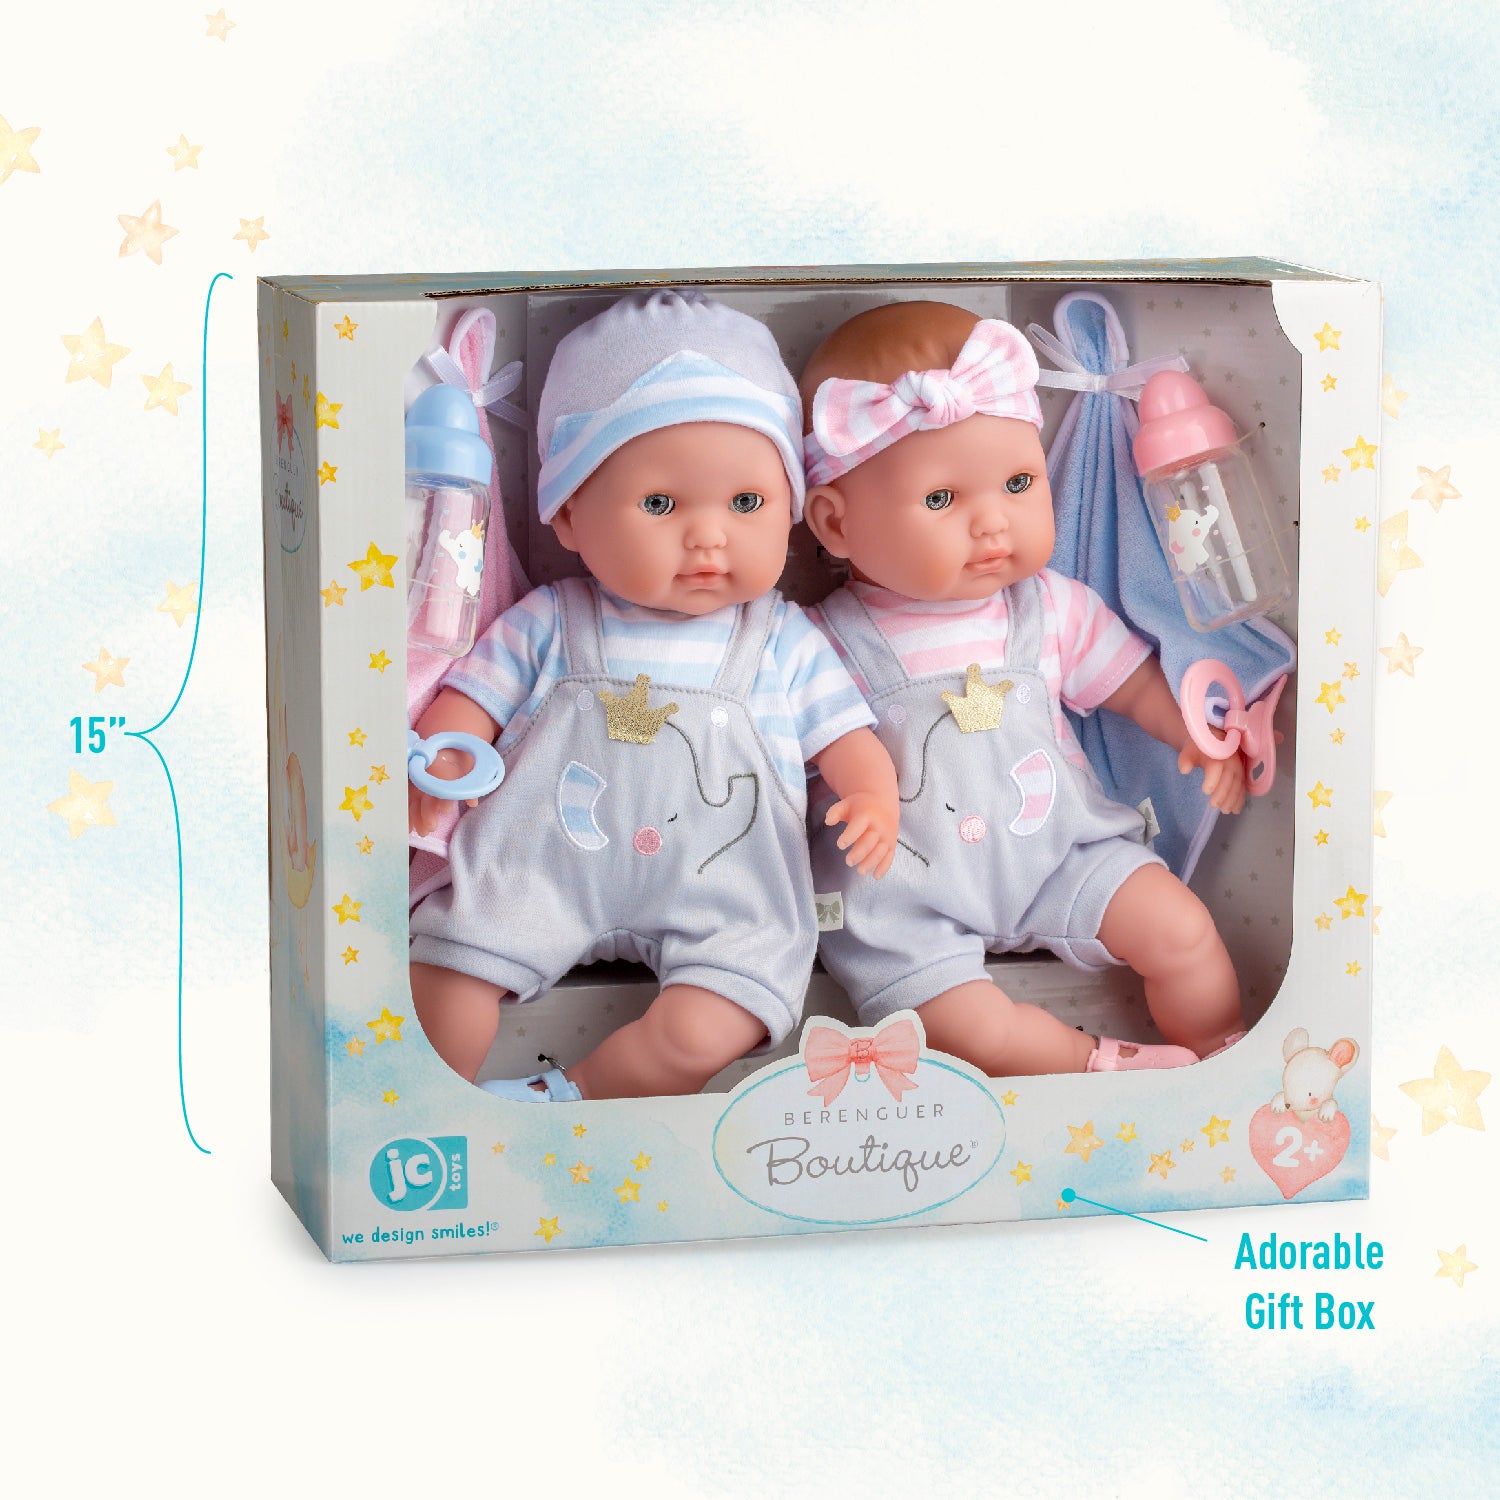 JC Toys, Berenguer Boutique TWINS 15in Soft Body Baby Doll Open/Close ...